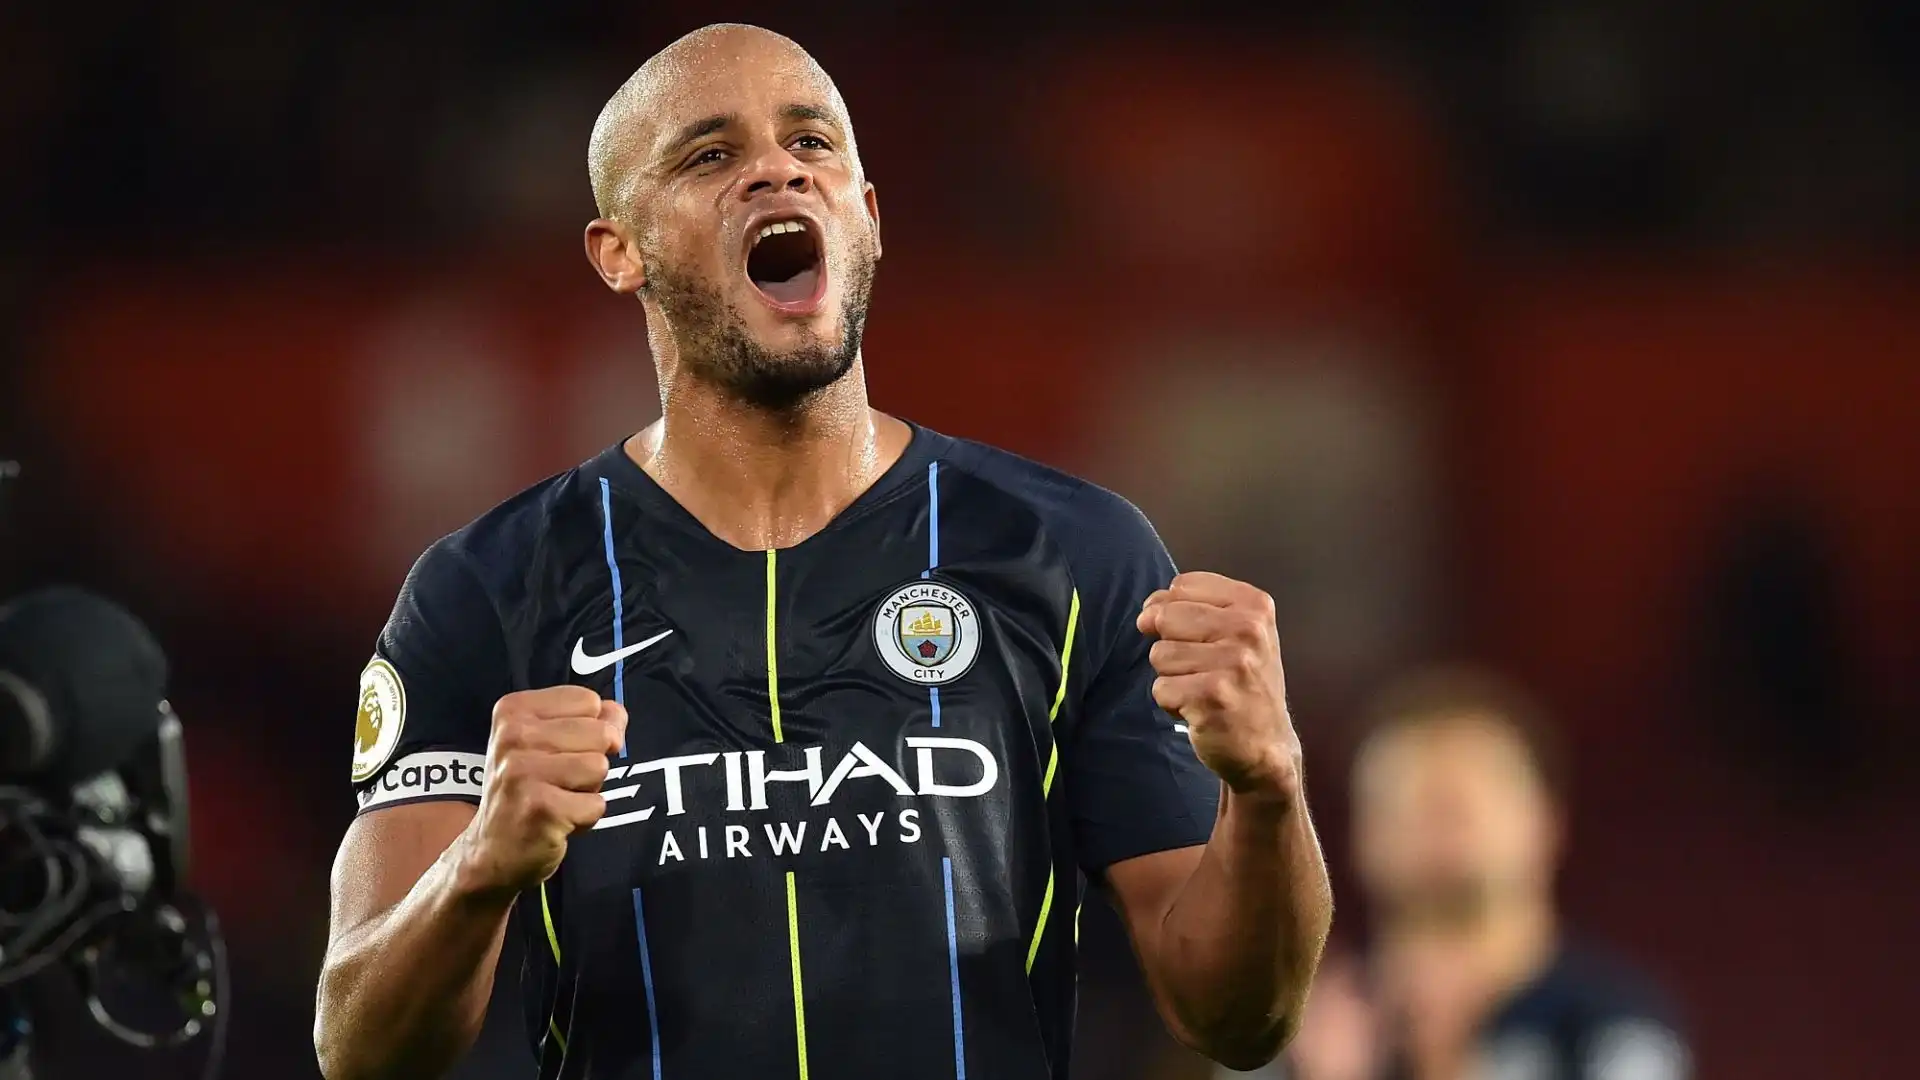 Vincent Kompany: Master in Business Administration